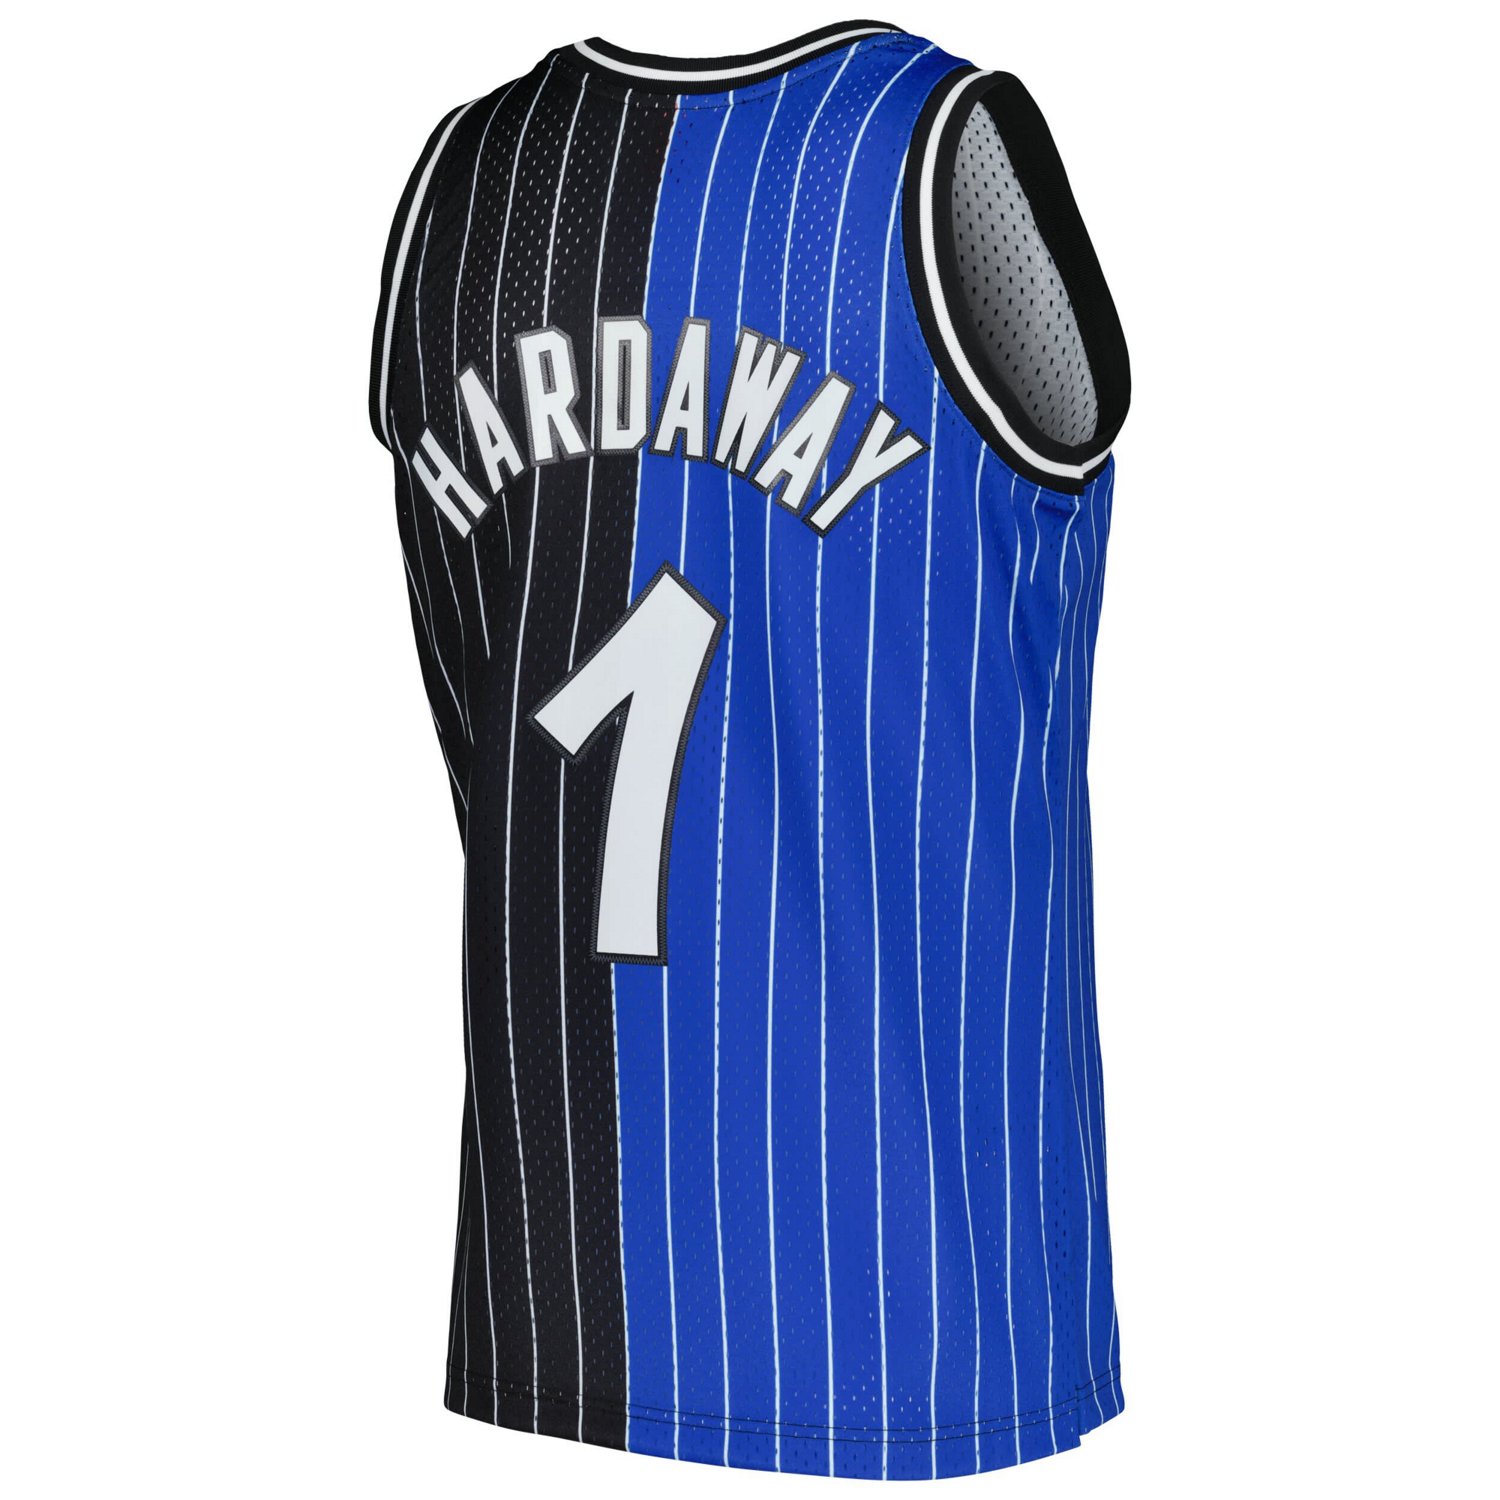 mitchell and ness penny hardaway jersey